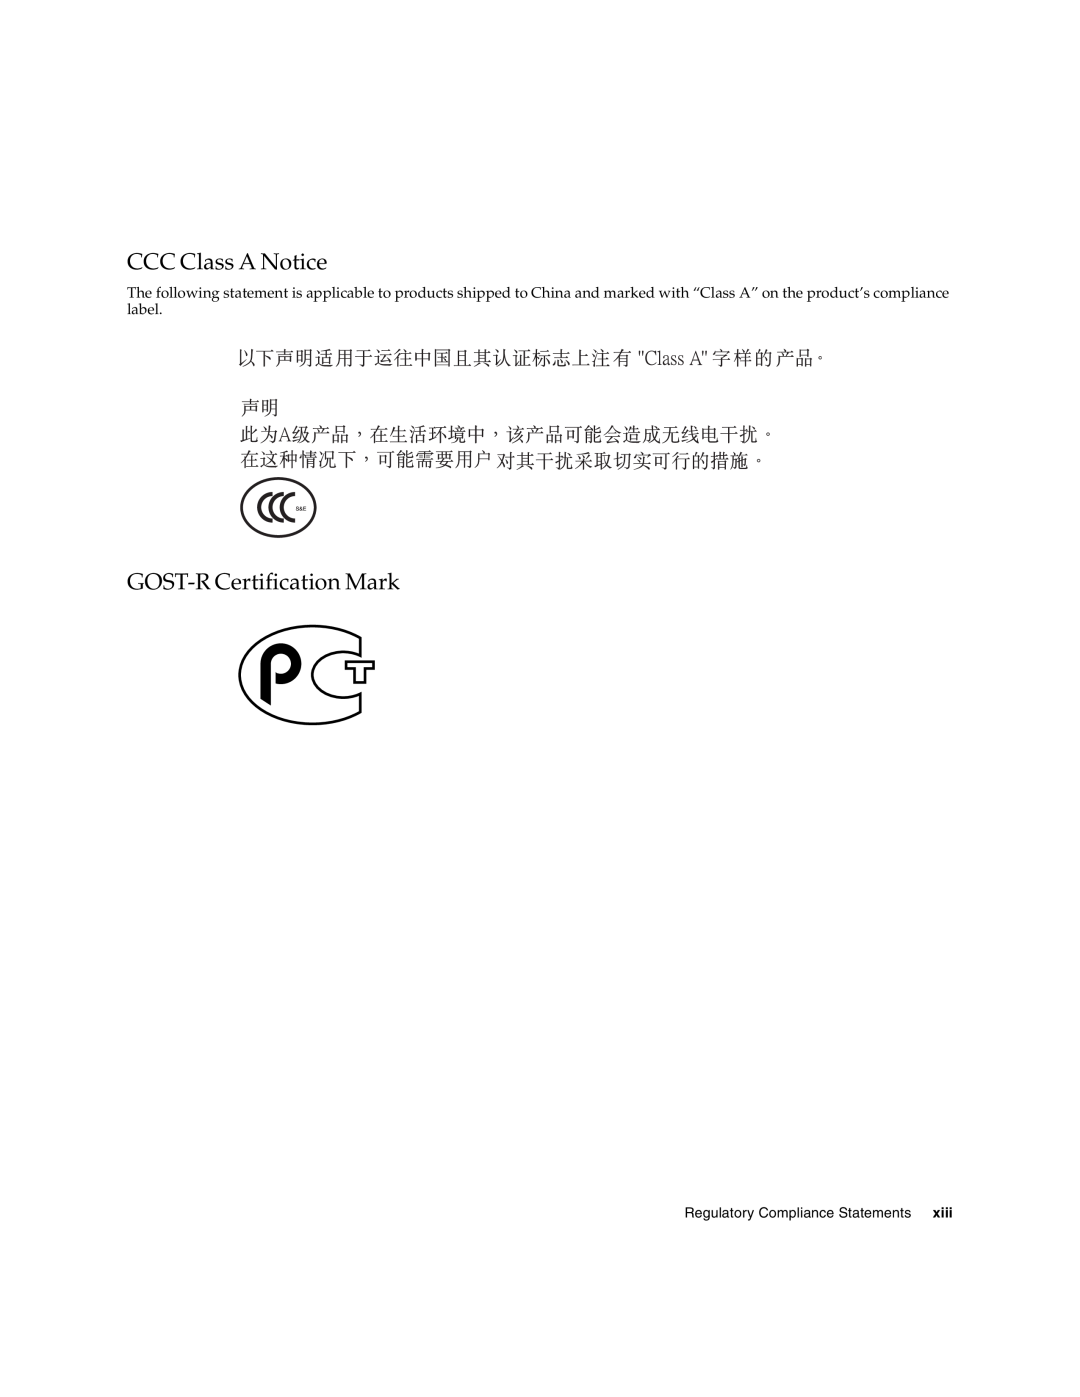 Sun Microsystems PCI manual CCC Class A Notice, GOST-R Certiﬁcation Mark, Regulatory Compliance Statements 